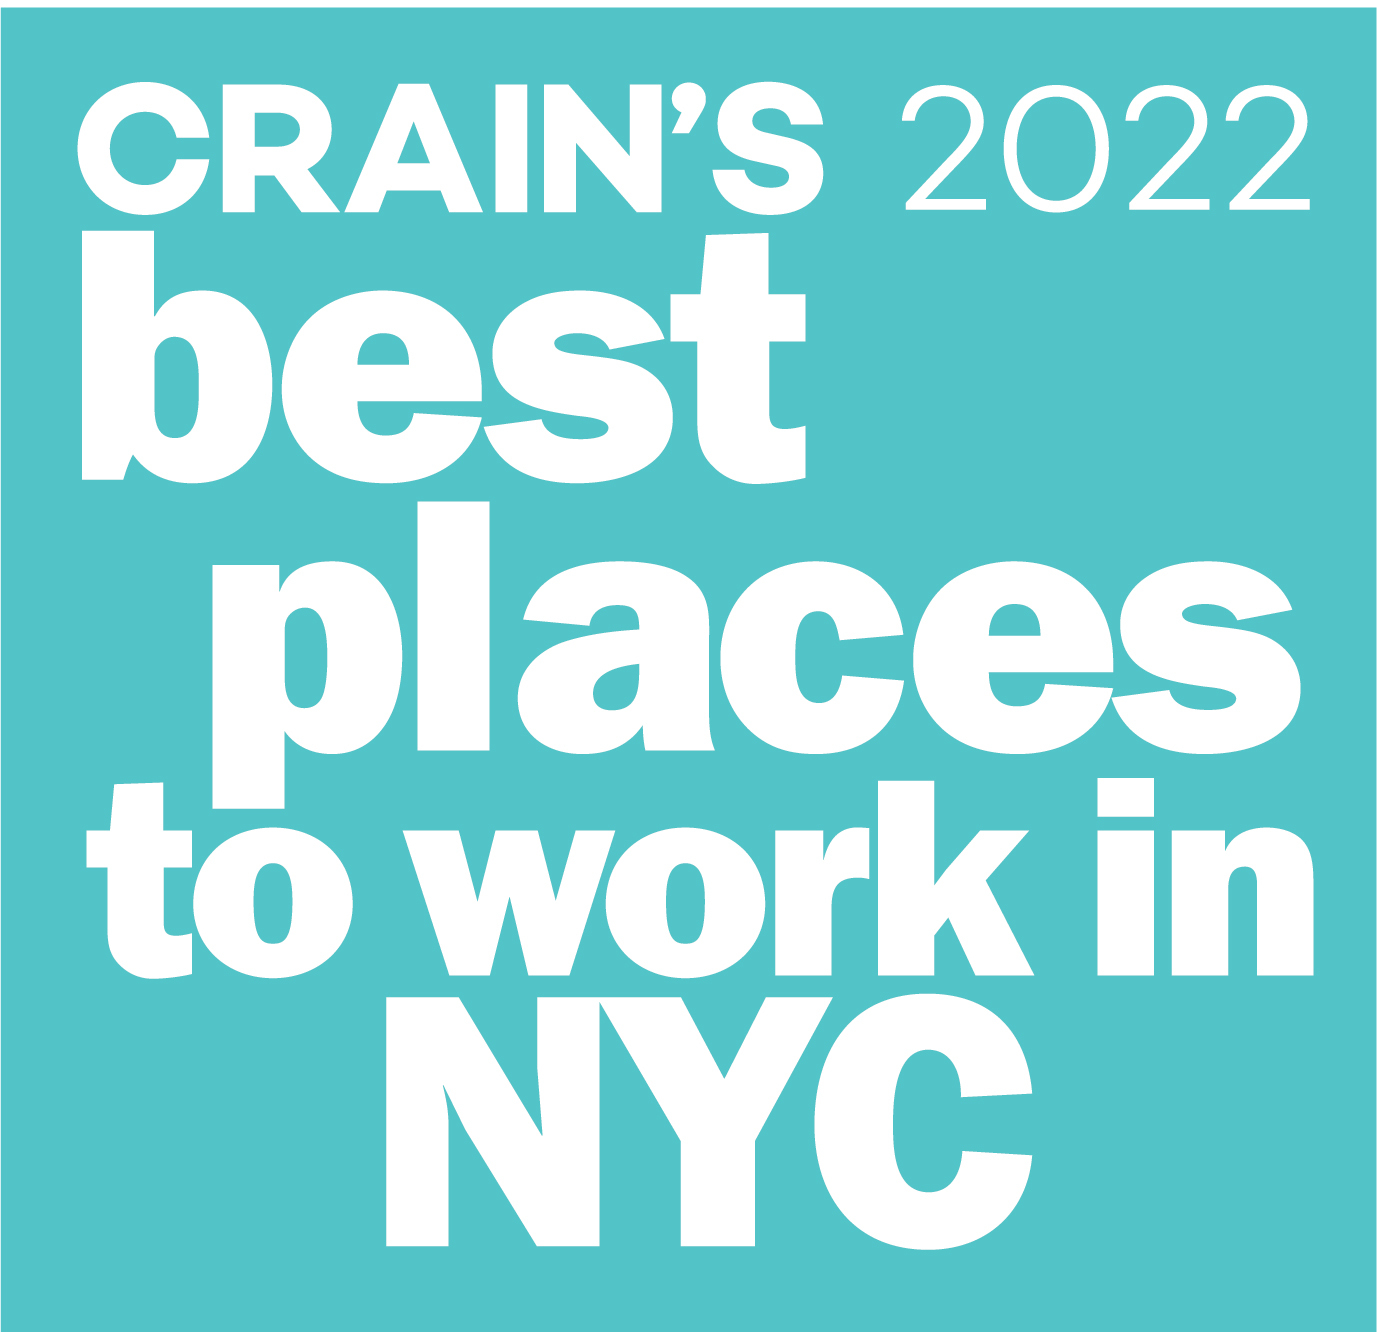 Crain's Best Places to Work in NYC